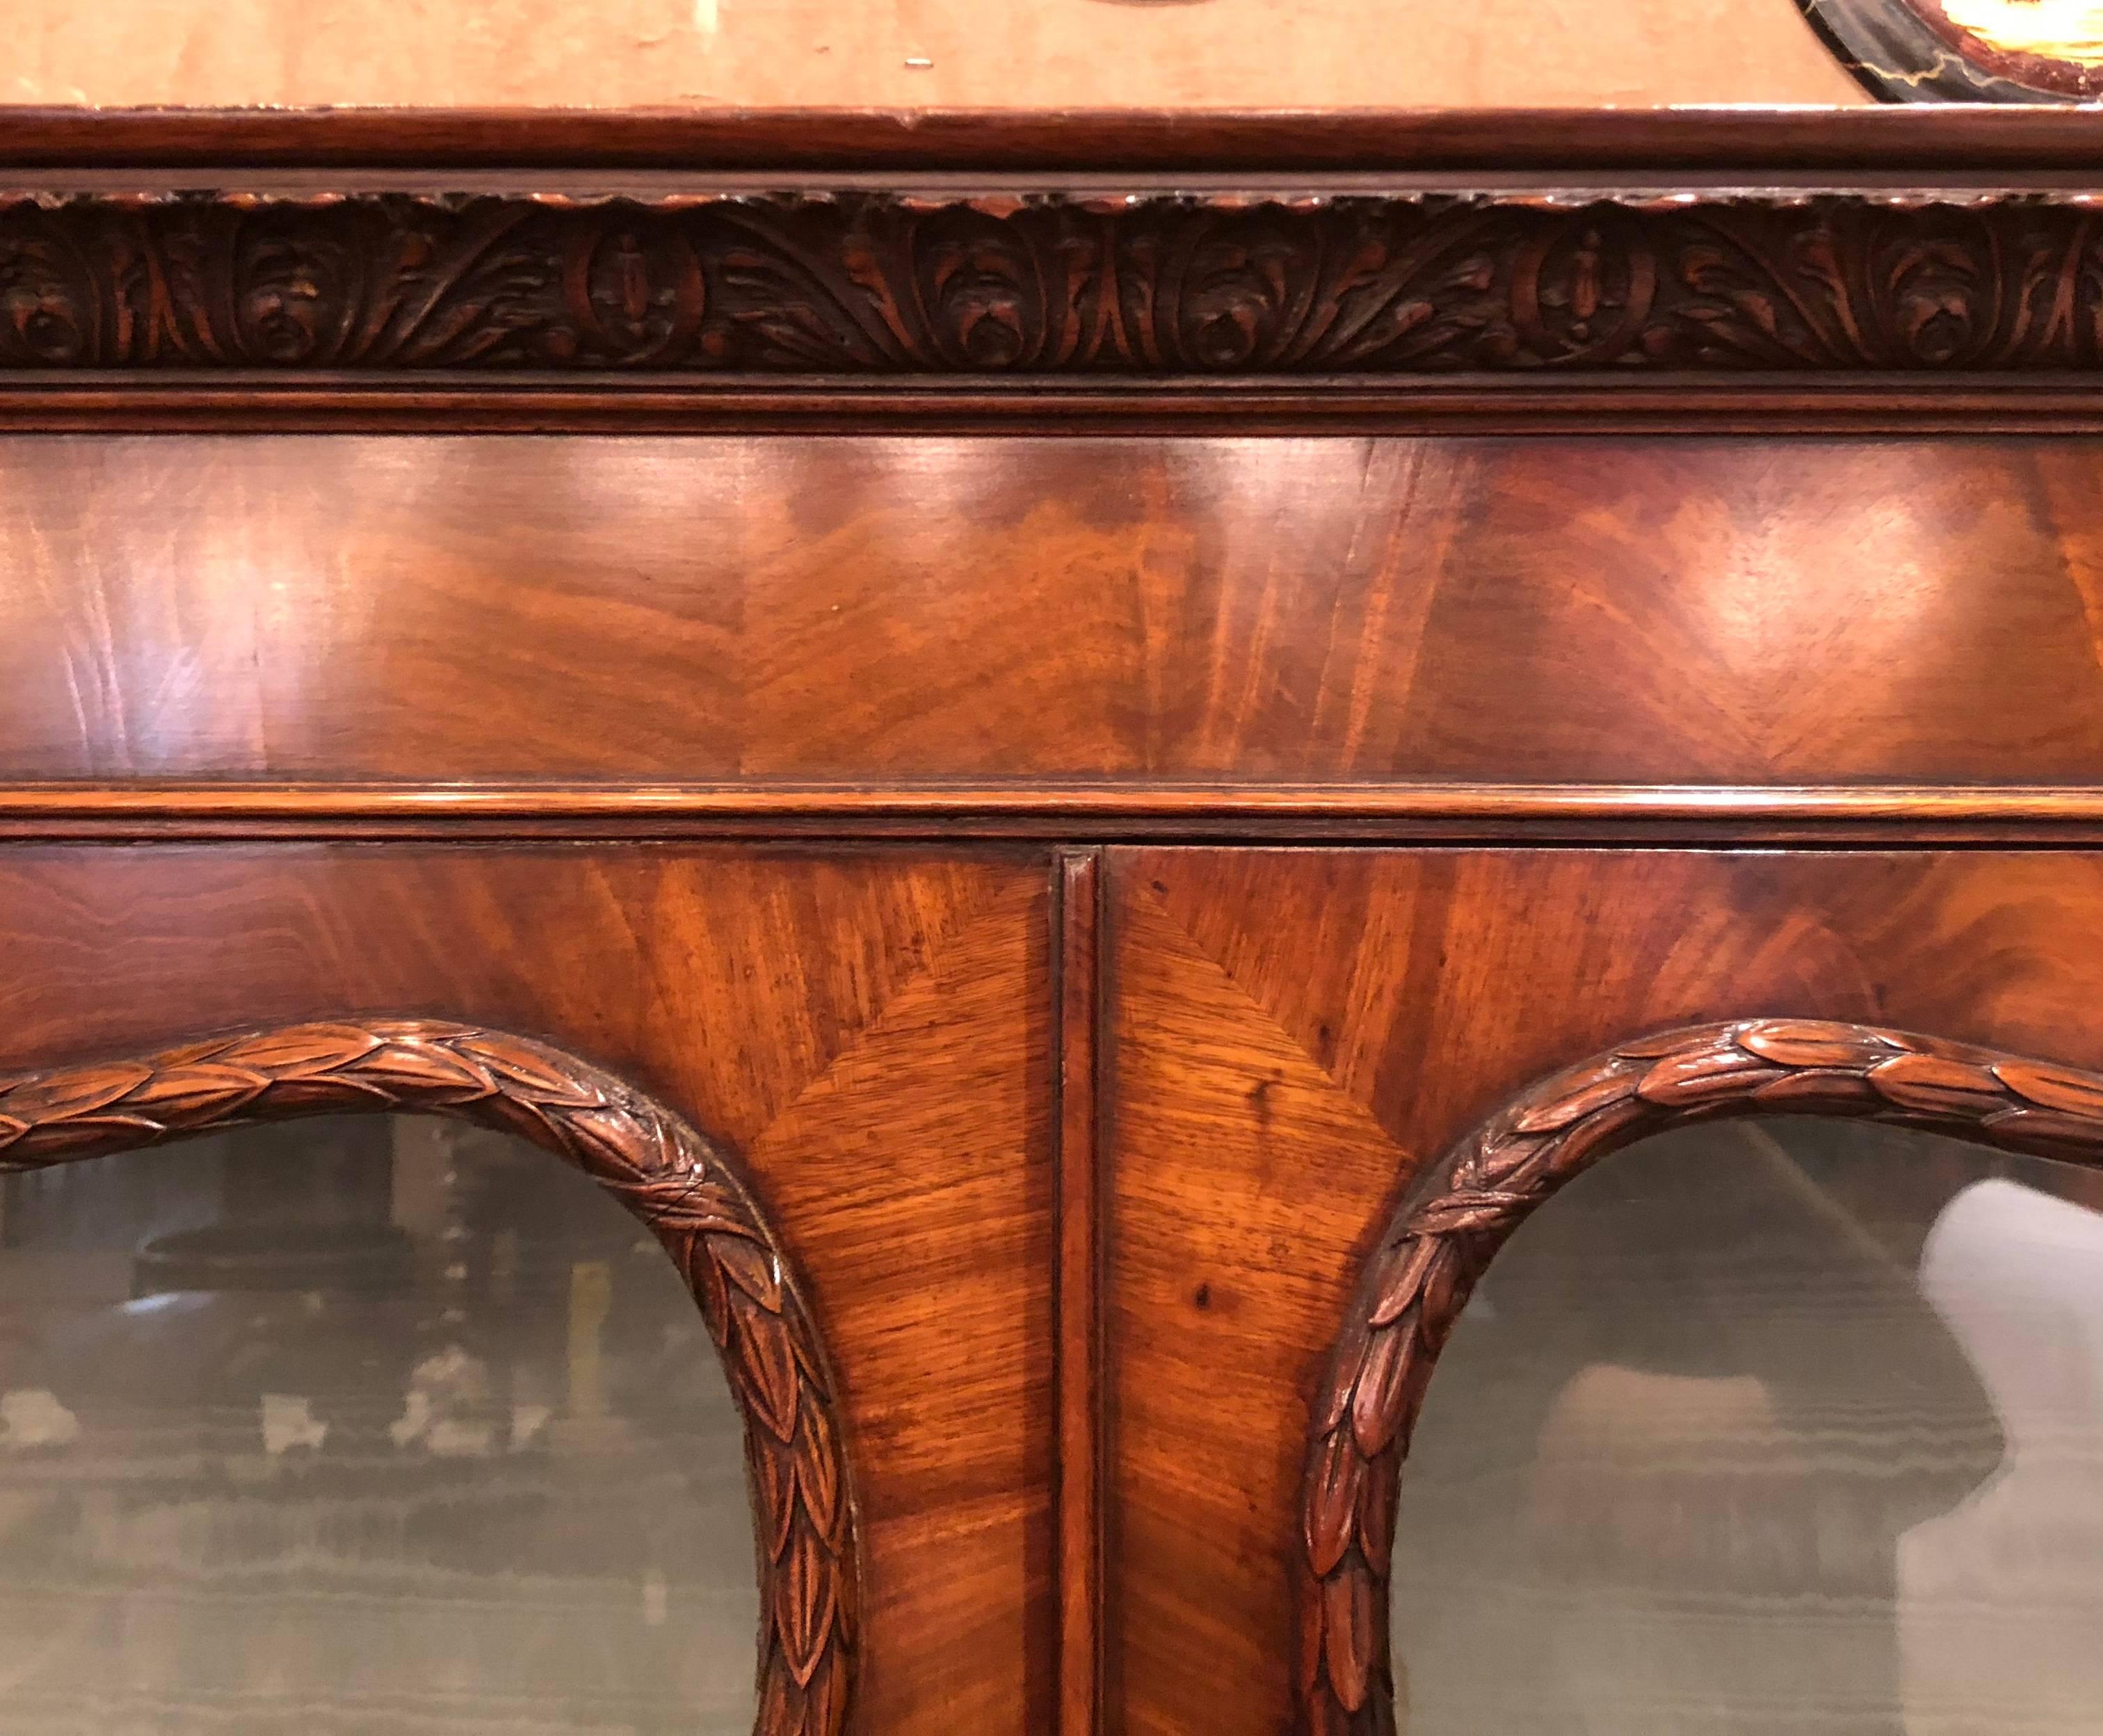 This handsome display cabinet commands your attention with its beautiful carving and fine walnut color.